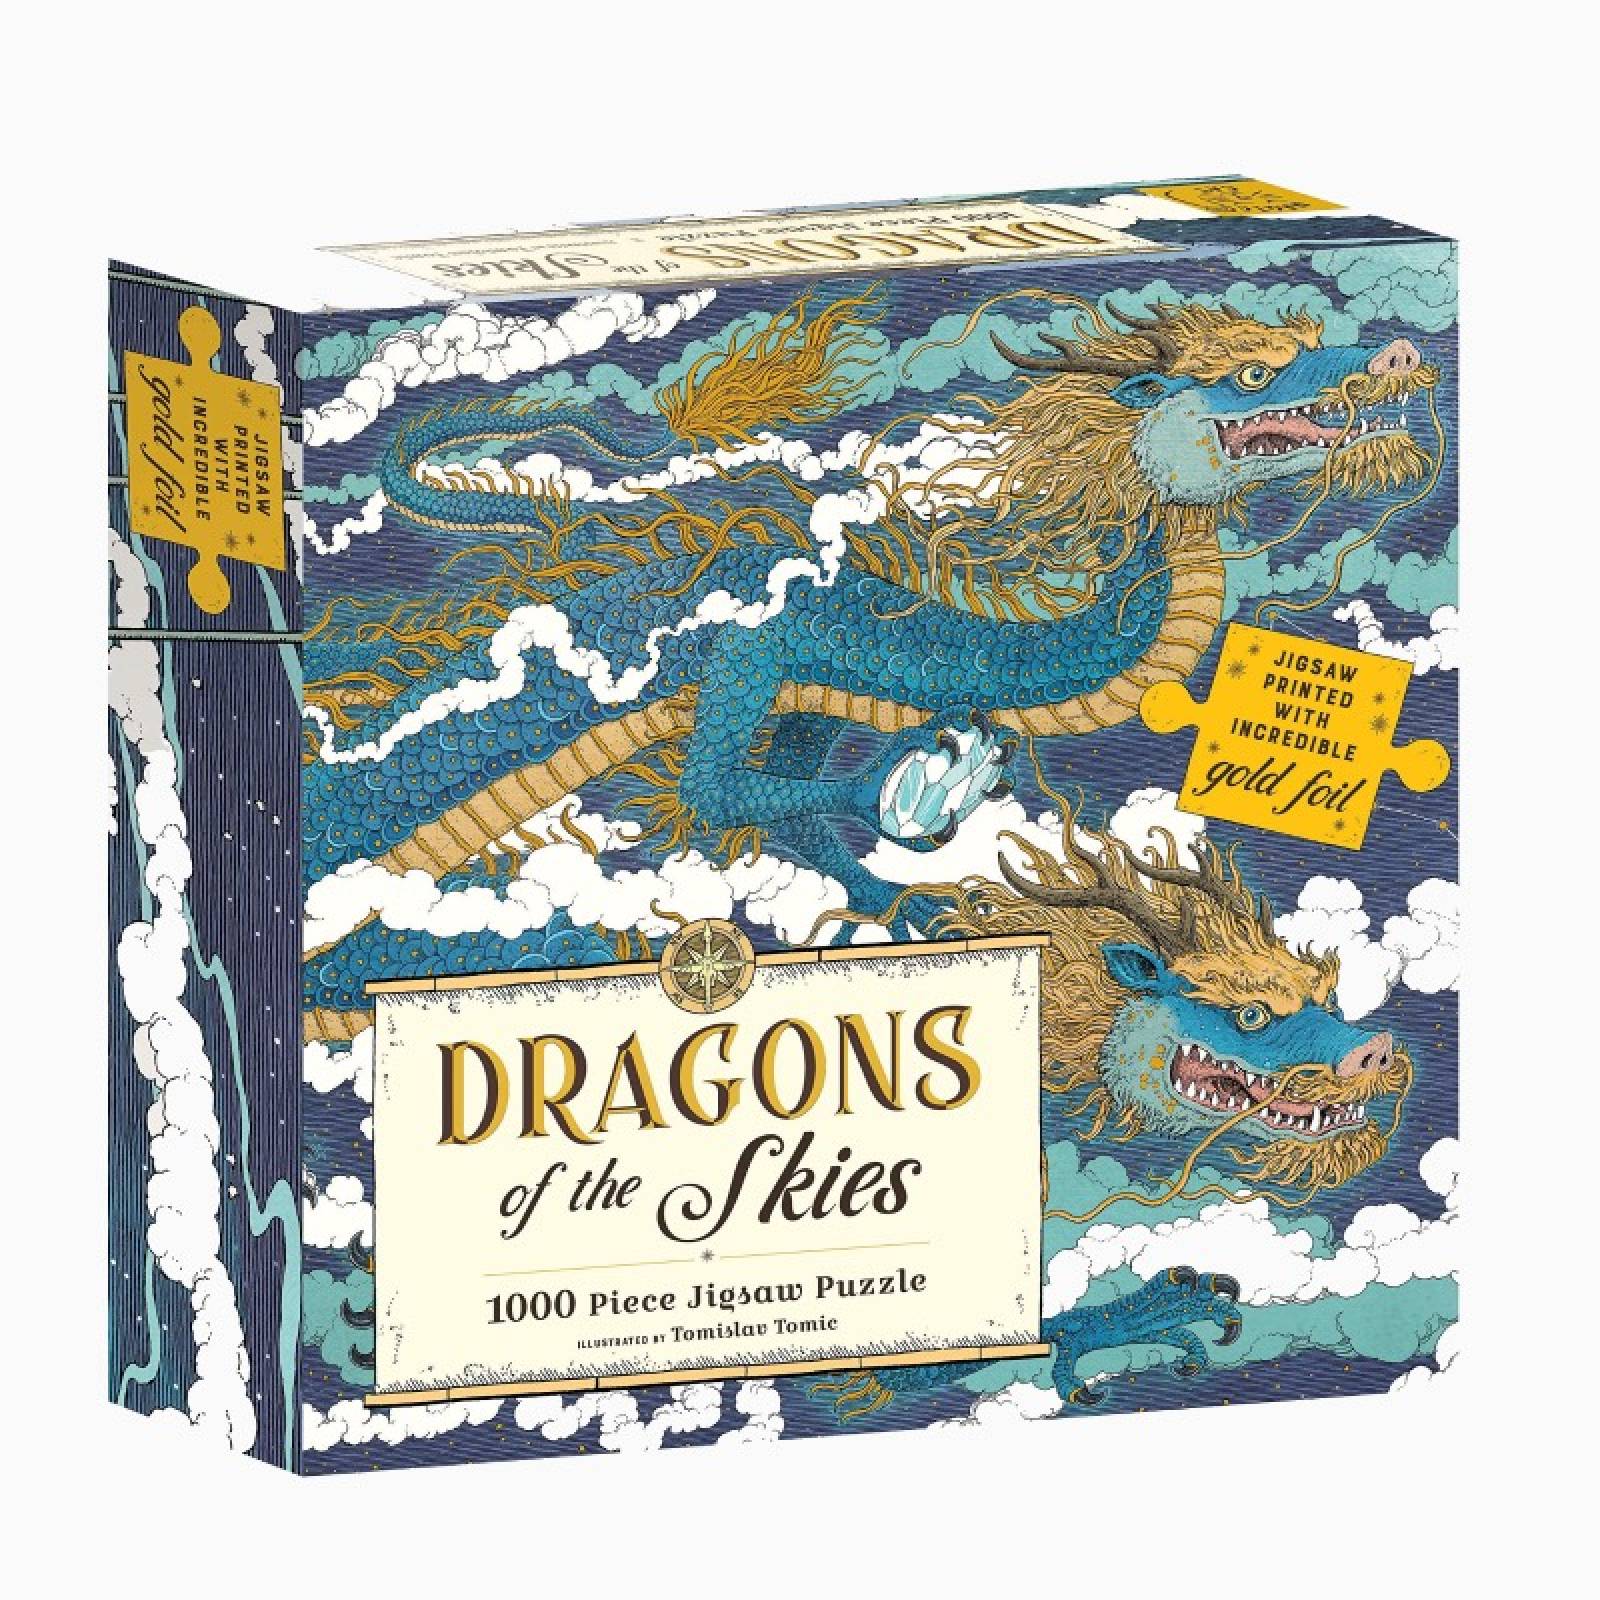 Dragons Of The Skies - 1000 Piece Jigsaw Puzzle